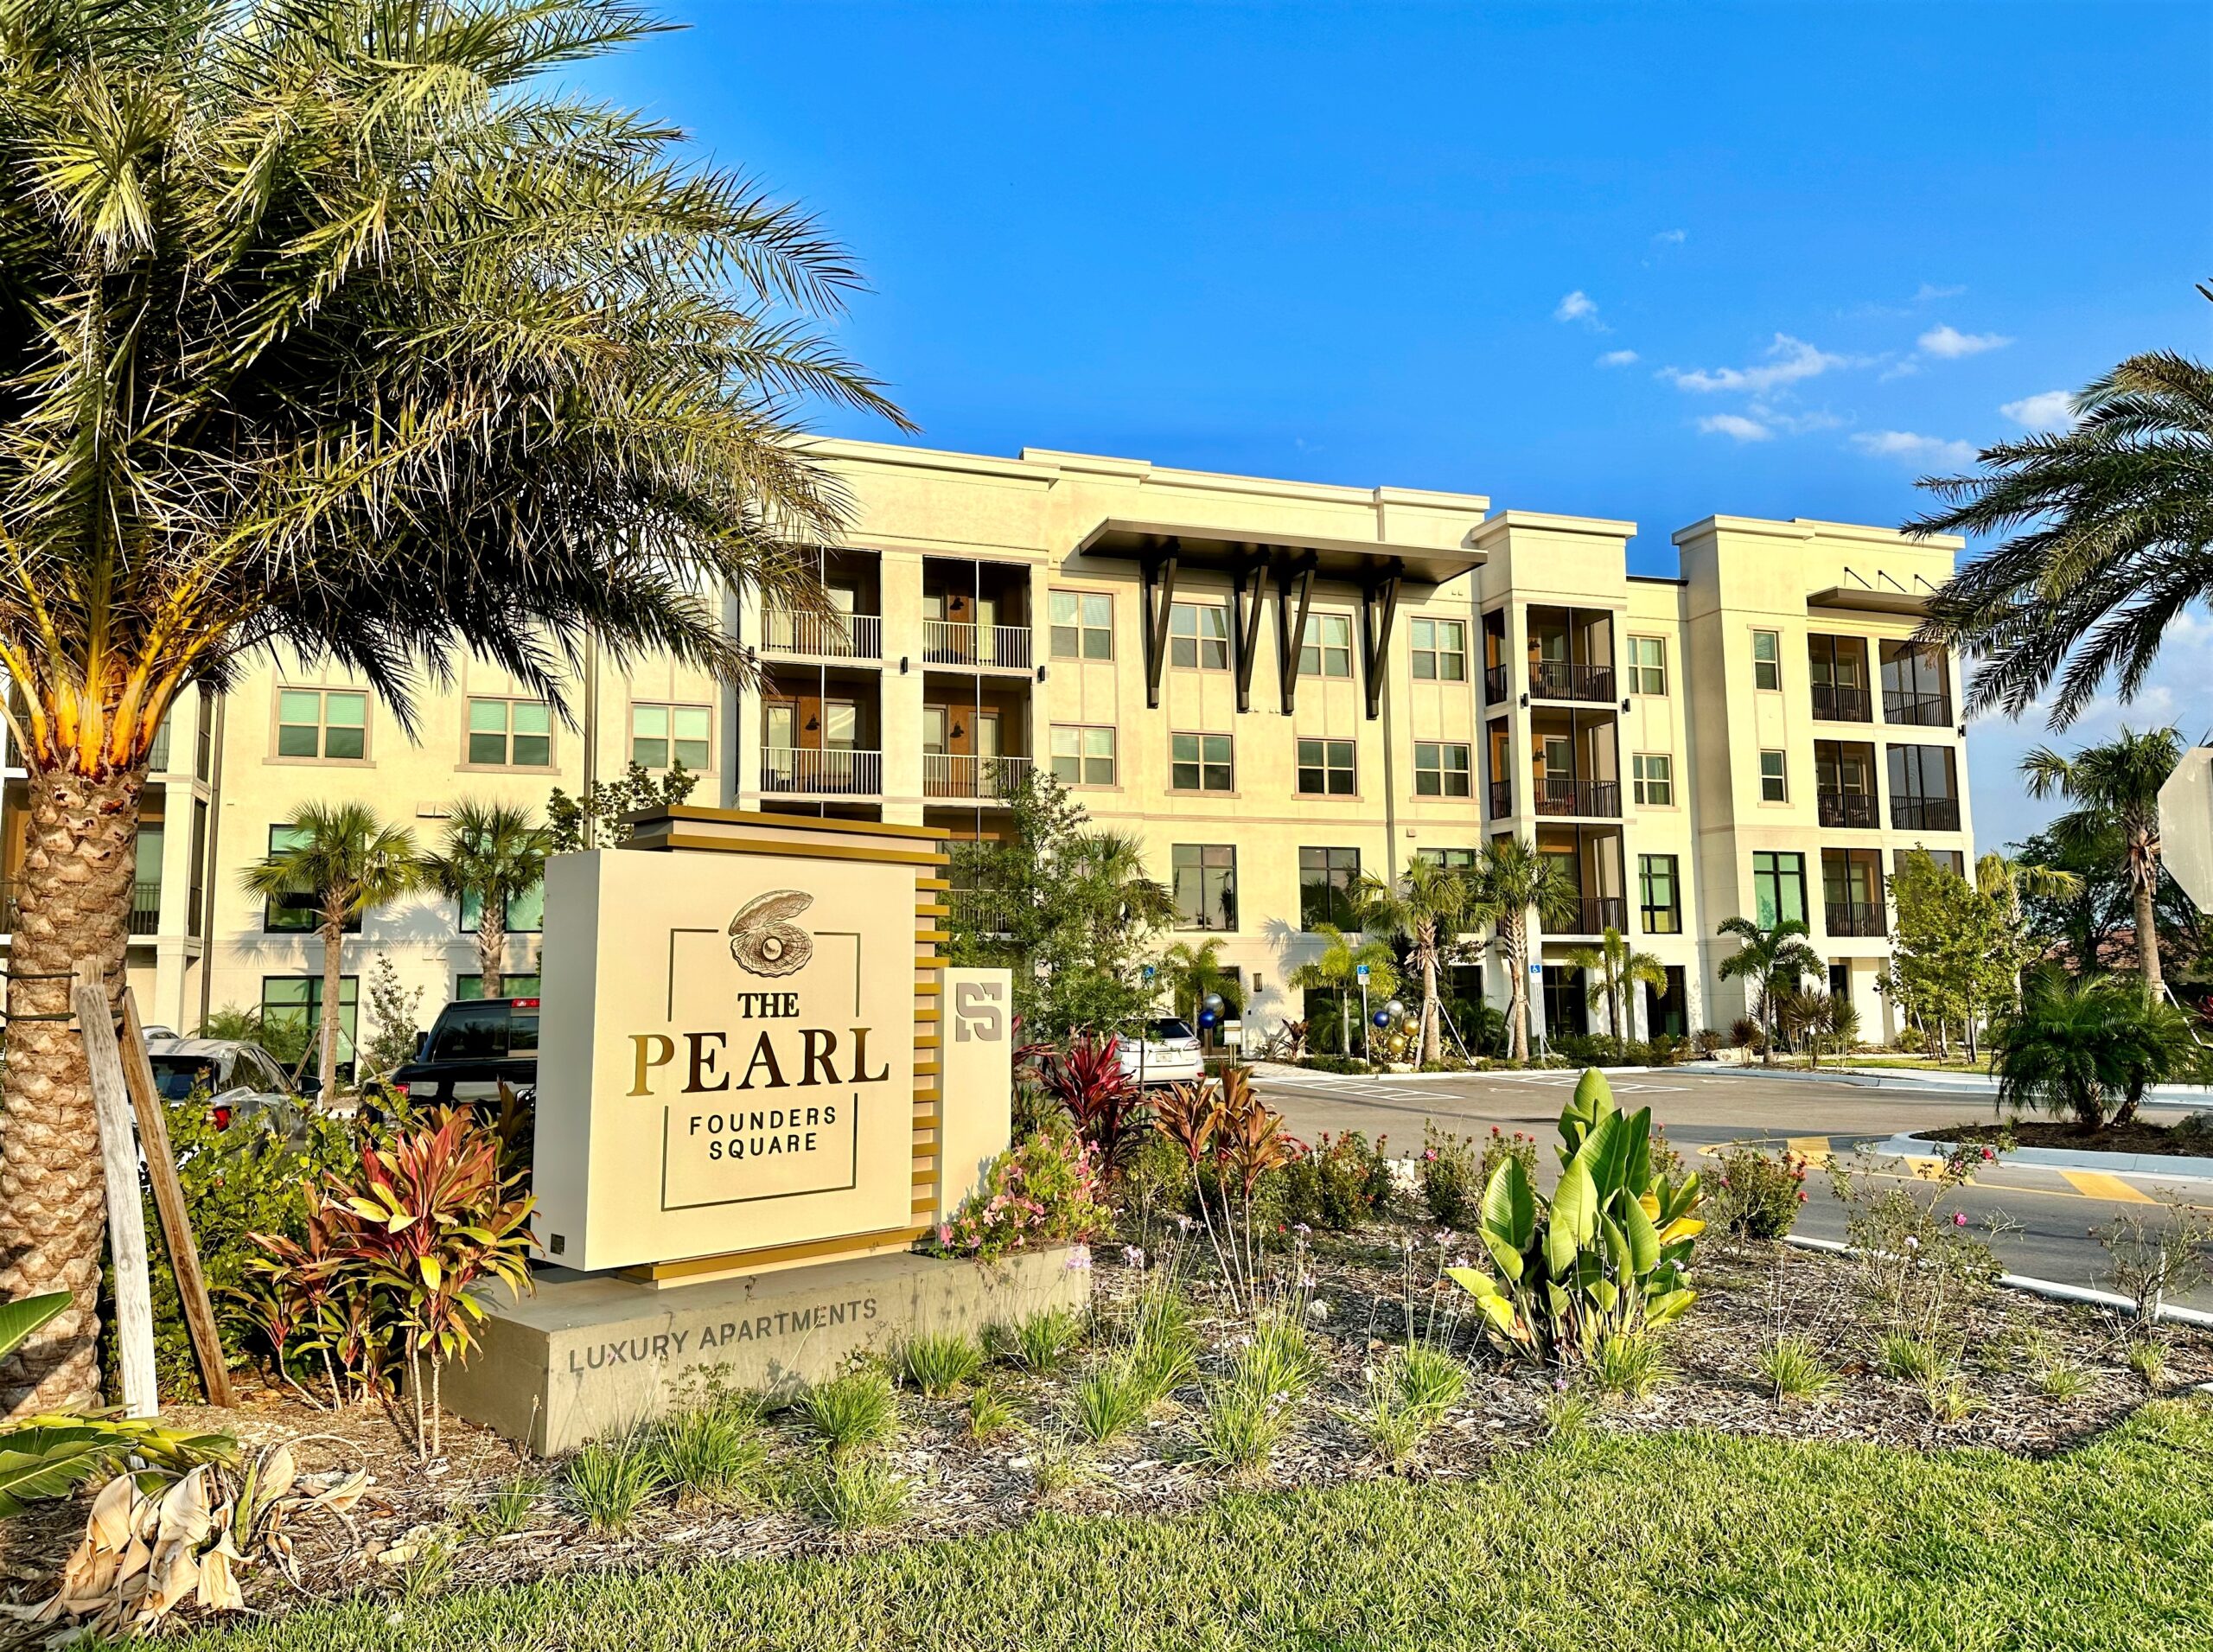 The Pearl Founders Square apartment complex in the Naples area.